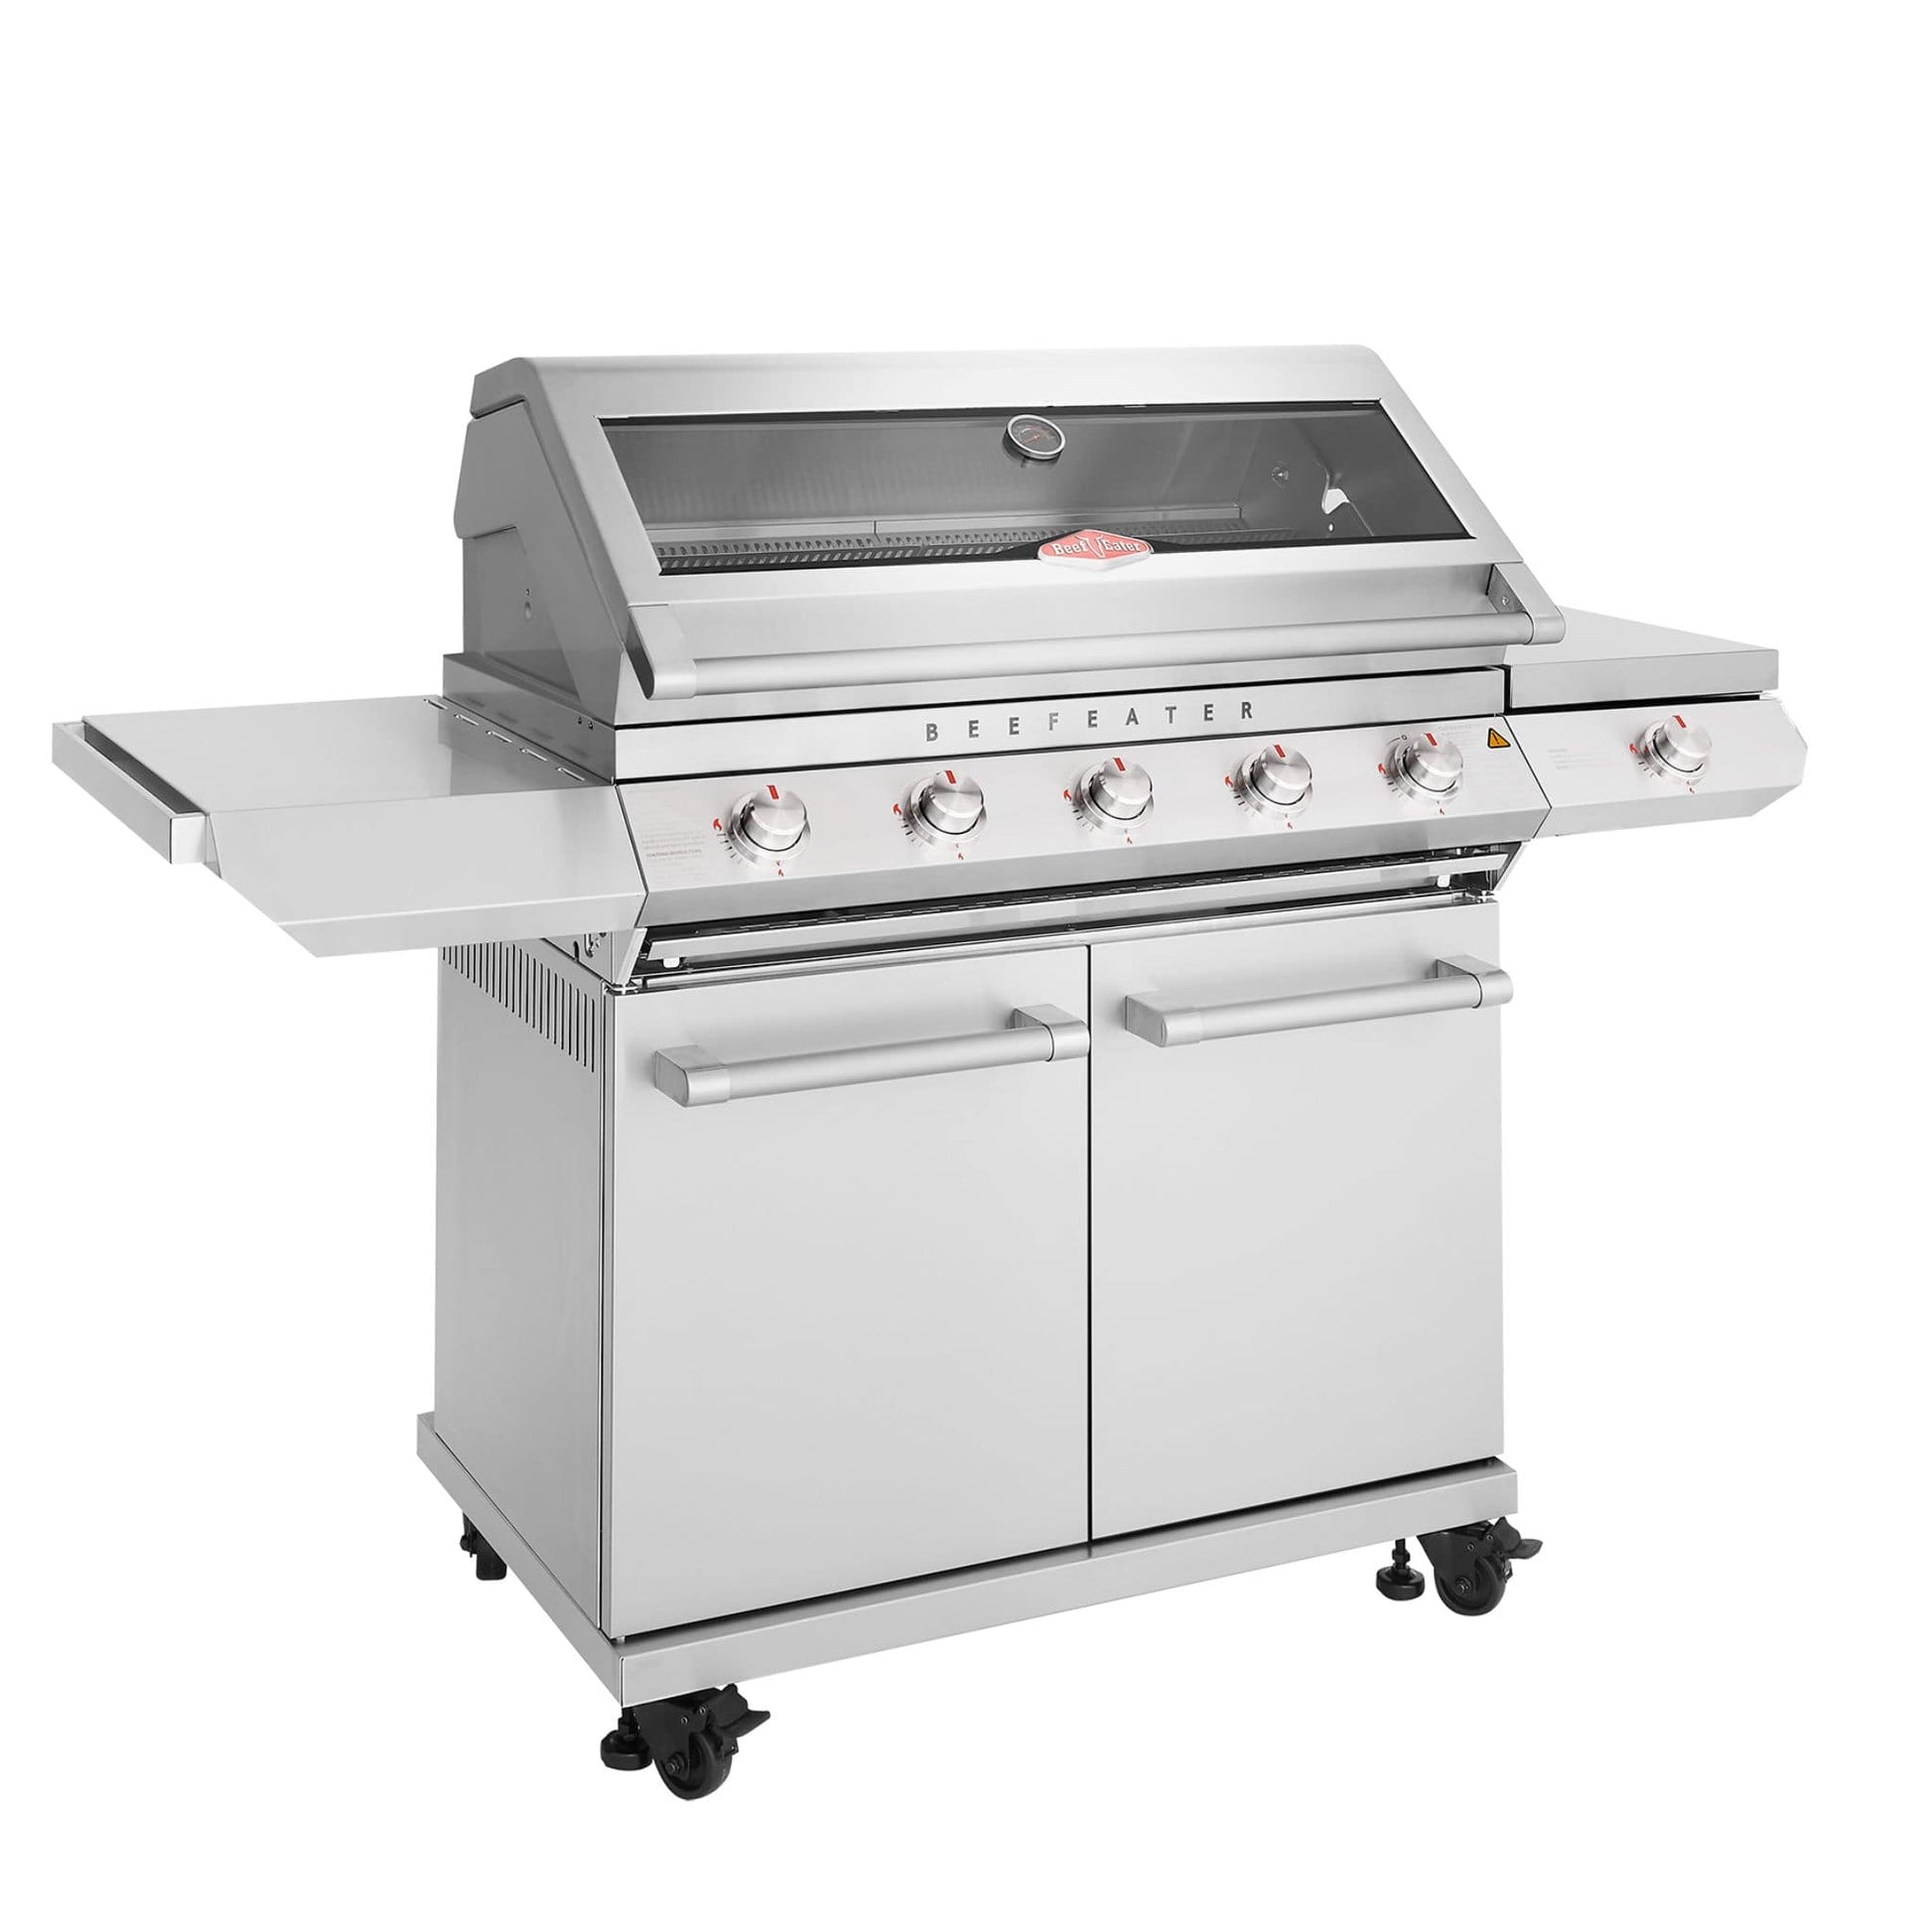 BeefEater Built-In Classic Barbecue 5 Burner with Side Burner & Trolley